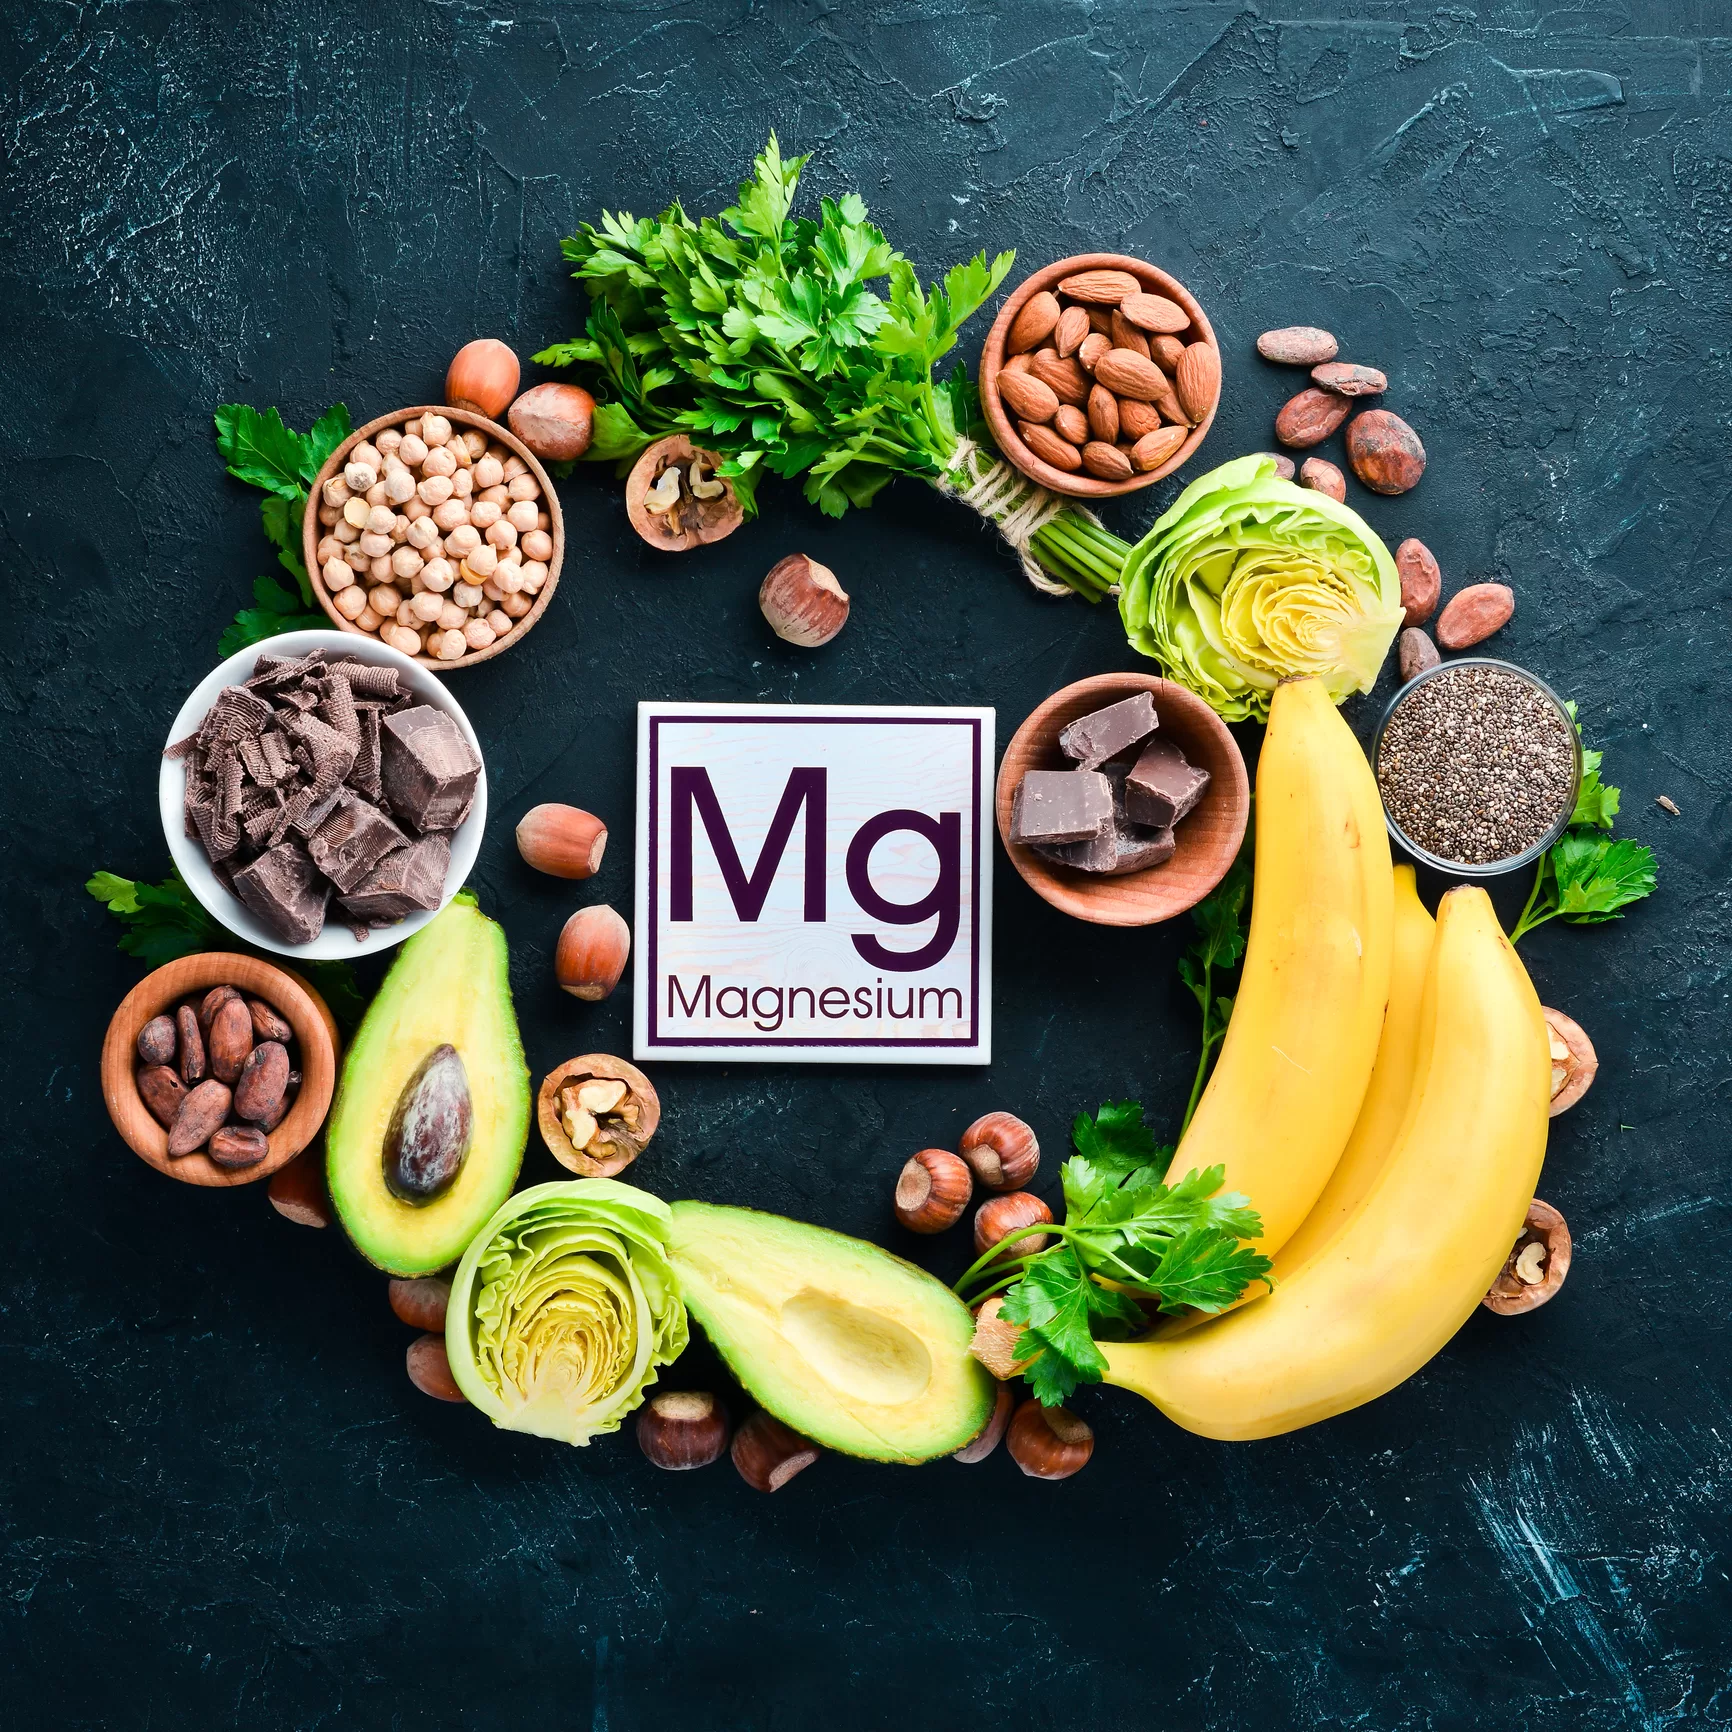 Symptoms of a lack of magnesium: foods you can eat to meet your need
